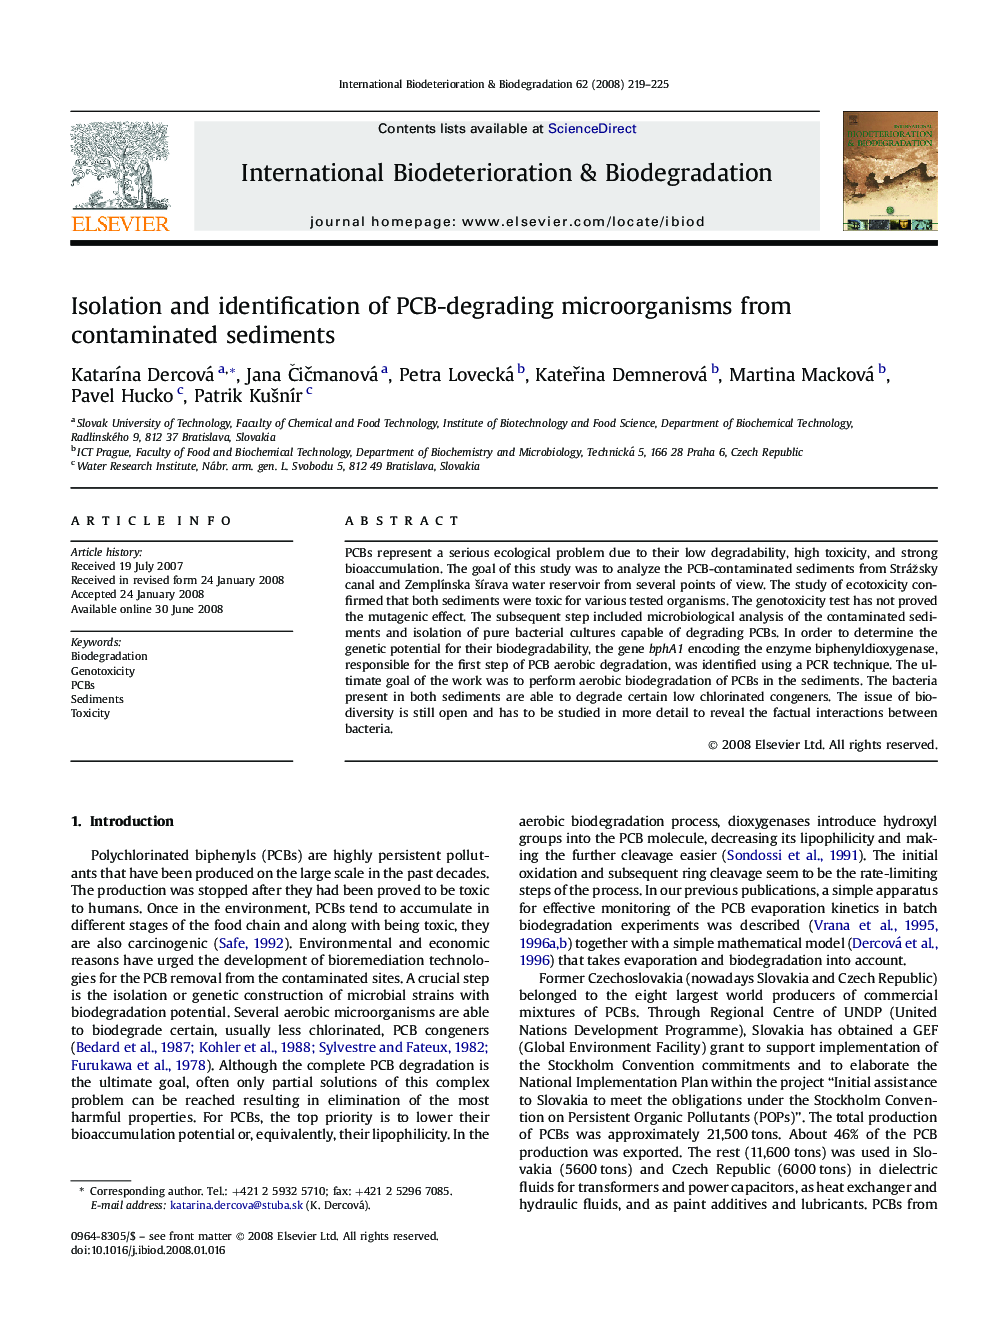 Isolation and identification of PCB-degrading microorganisms from contaminated sediments